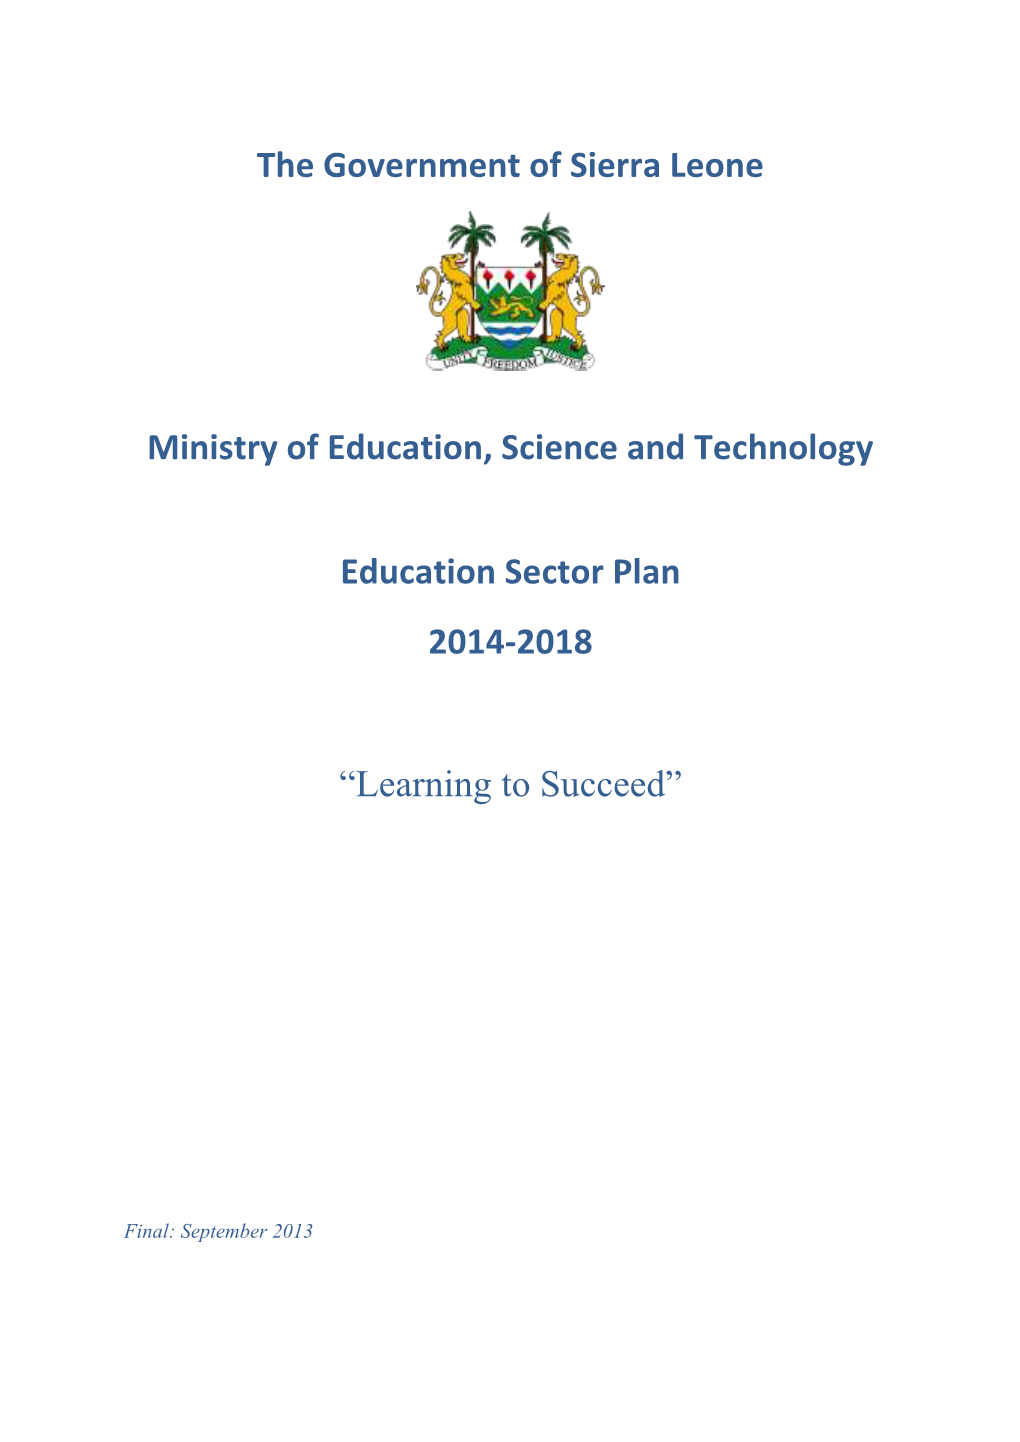 The Government of Sierra Leone Ministry of Education, Science And